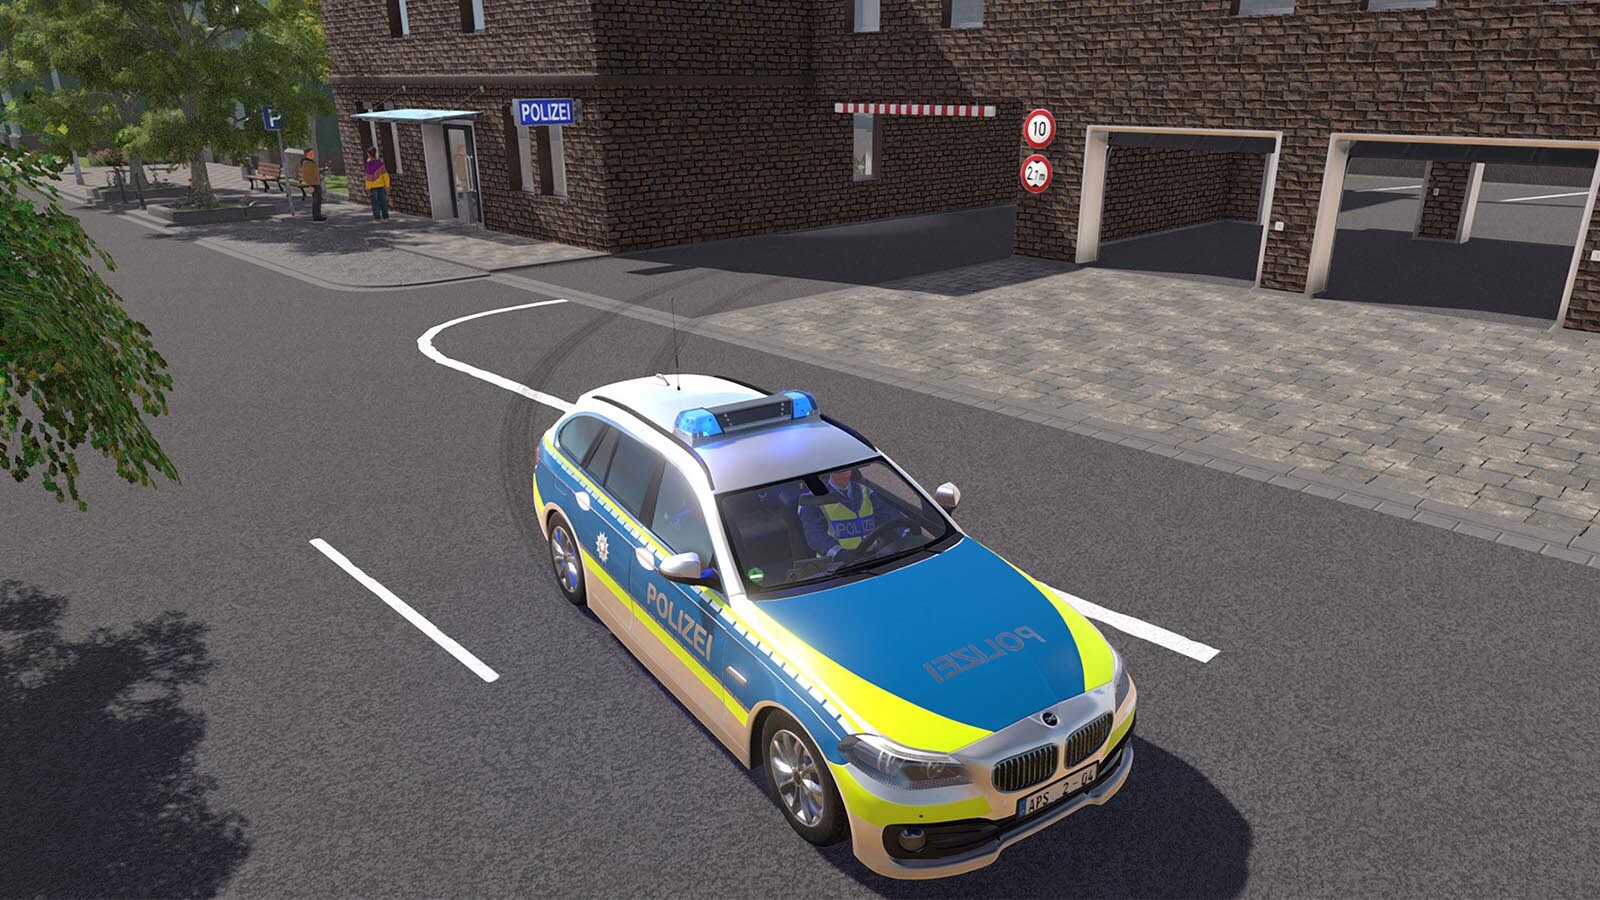 Buy Police - Key Steam Autobahn for 2 PC Simulator now